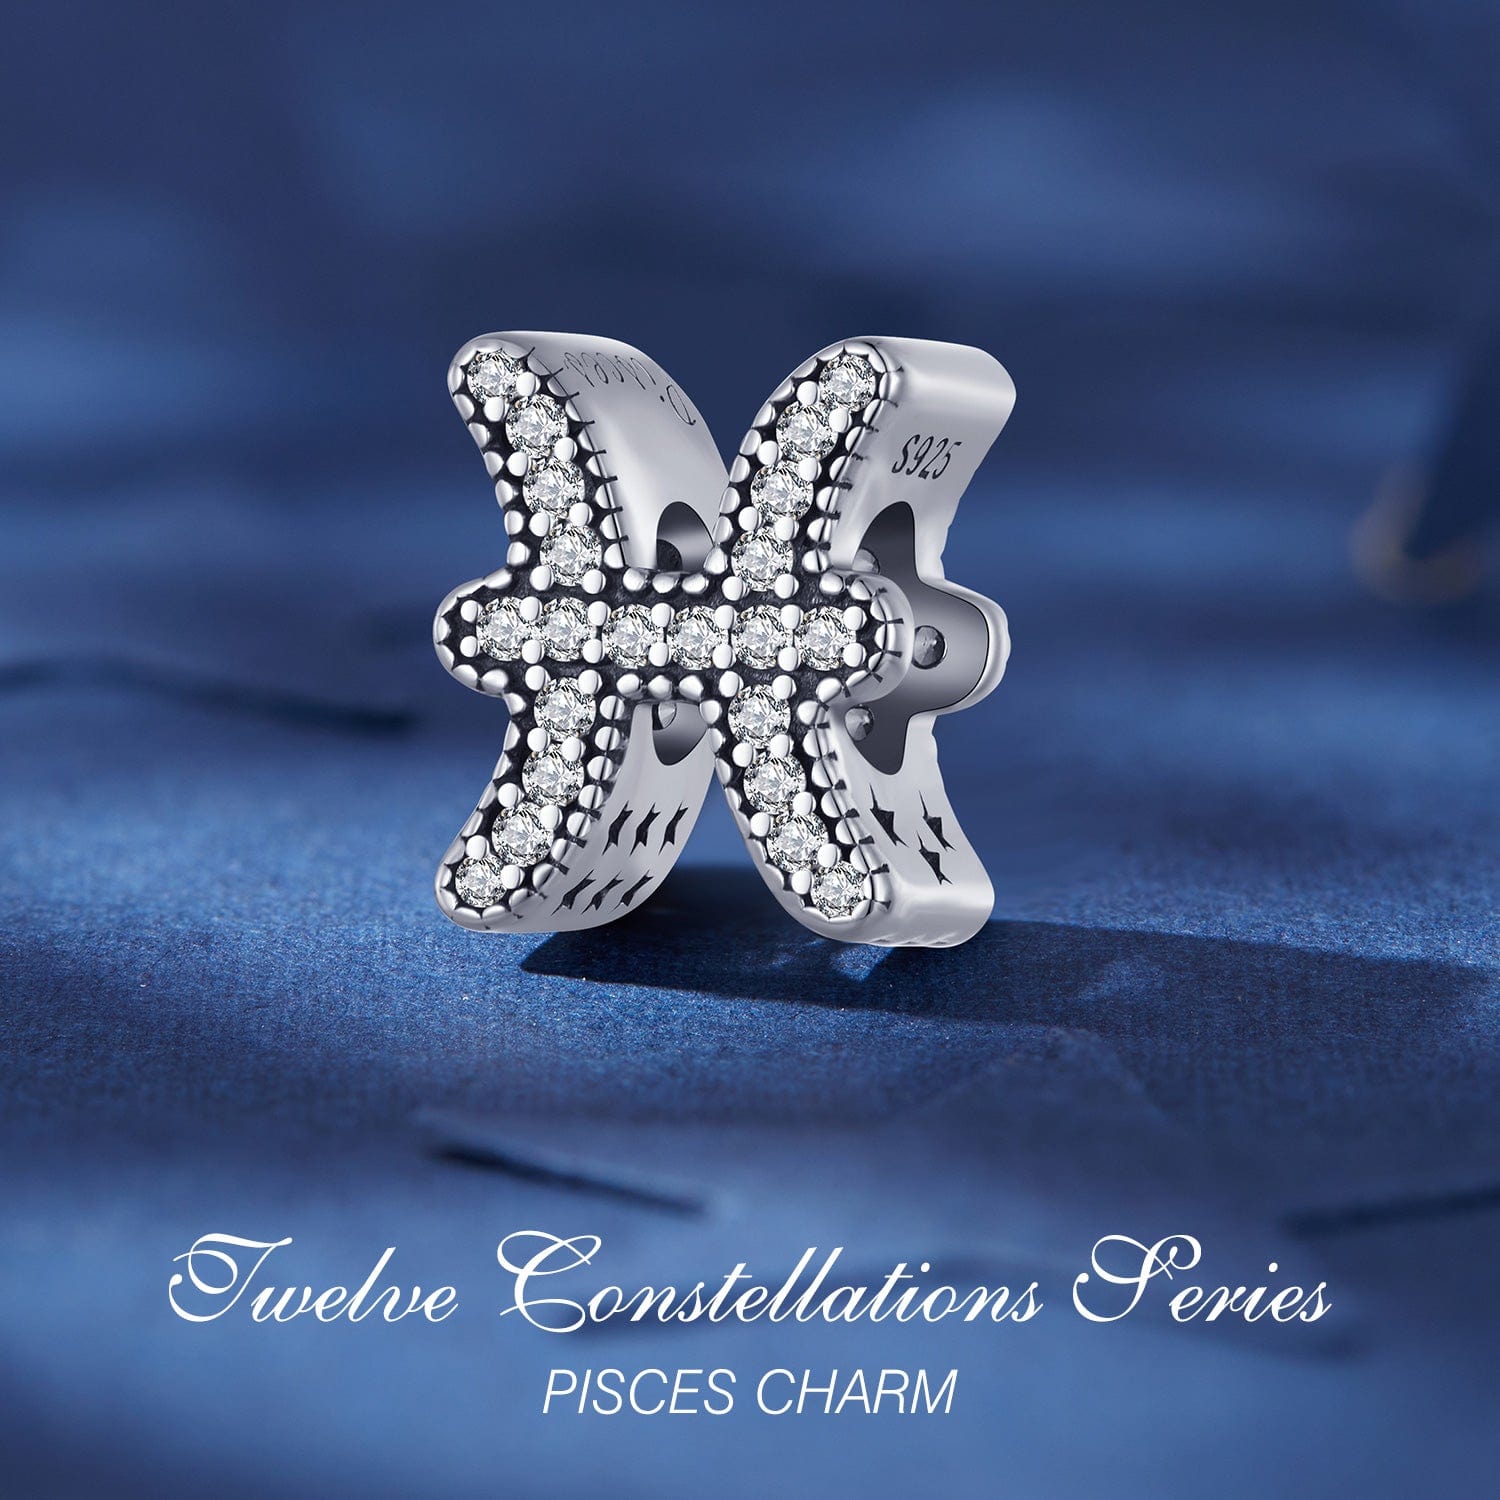 shipped in AUS CHARMS Star Sign Pisces Charm